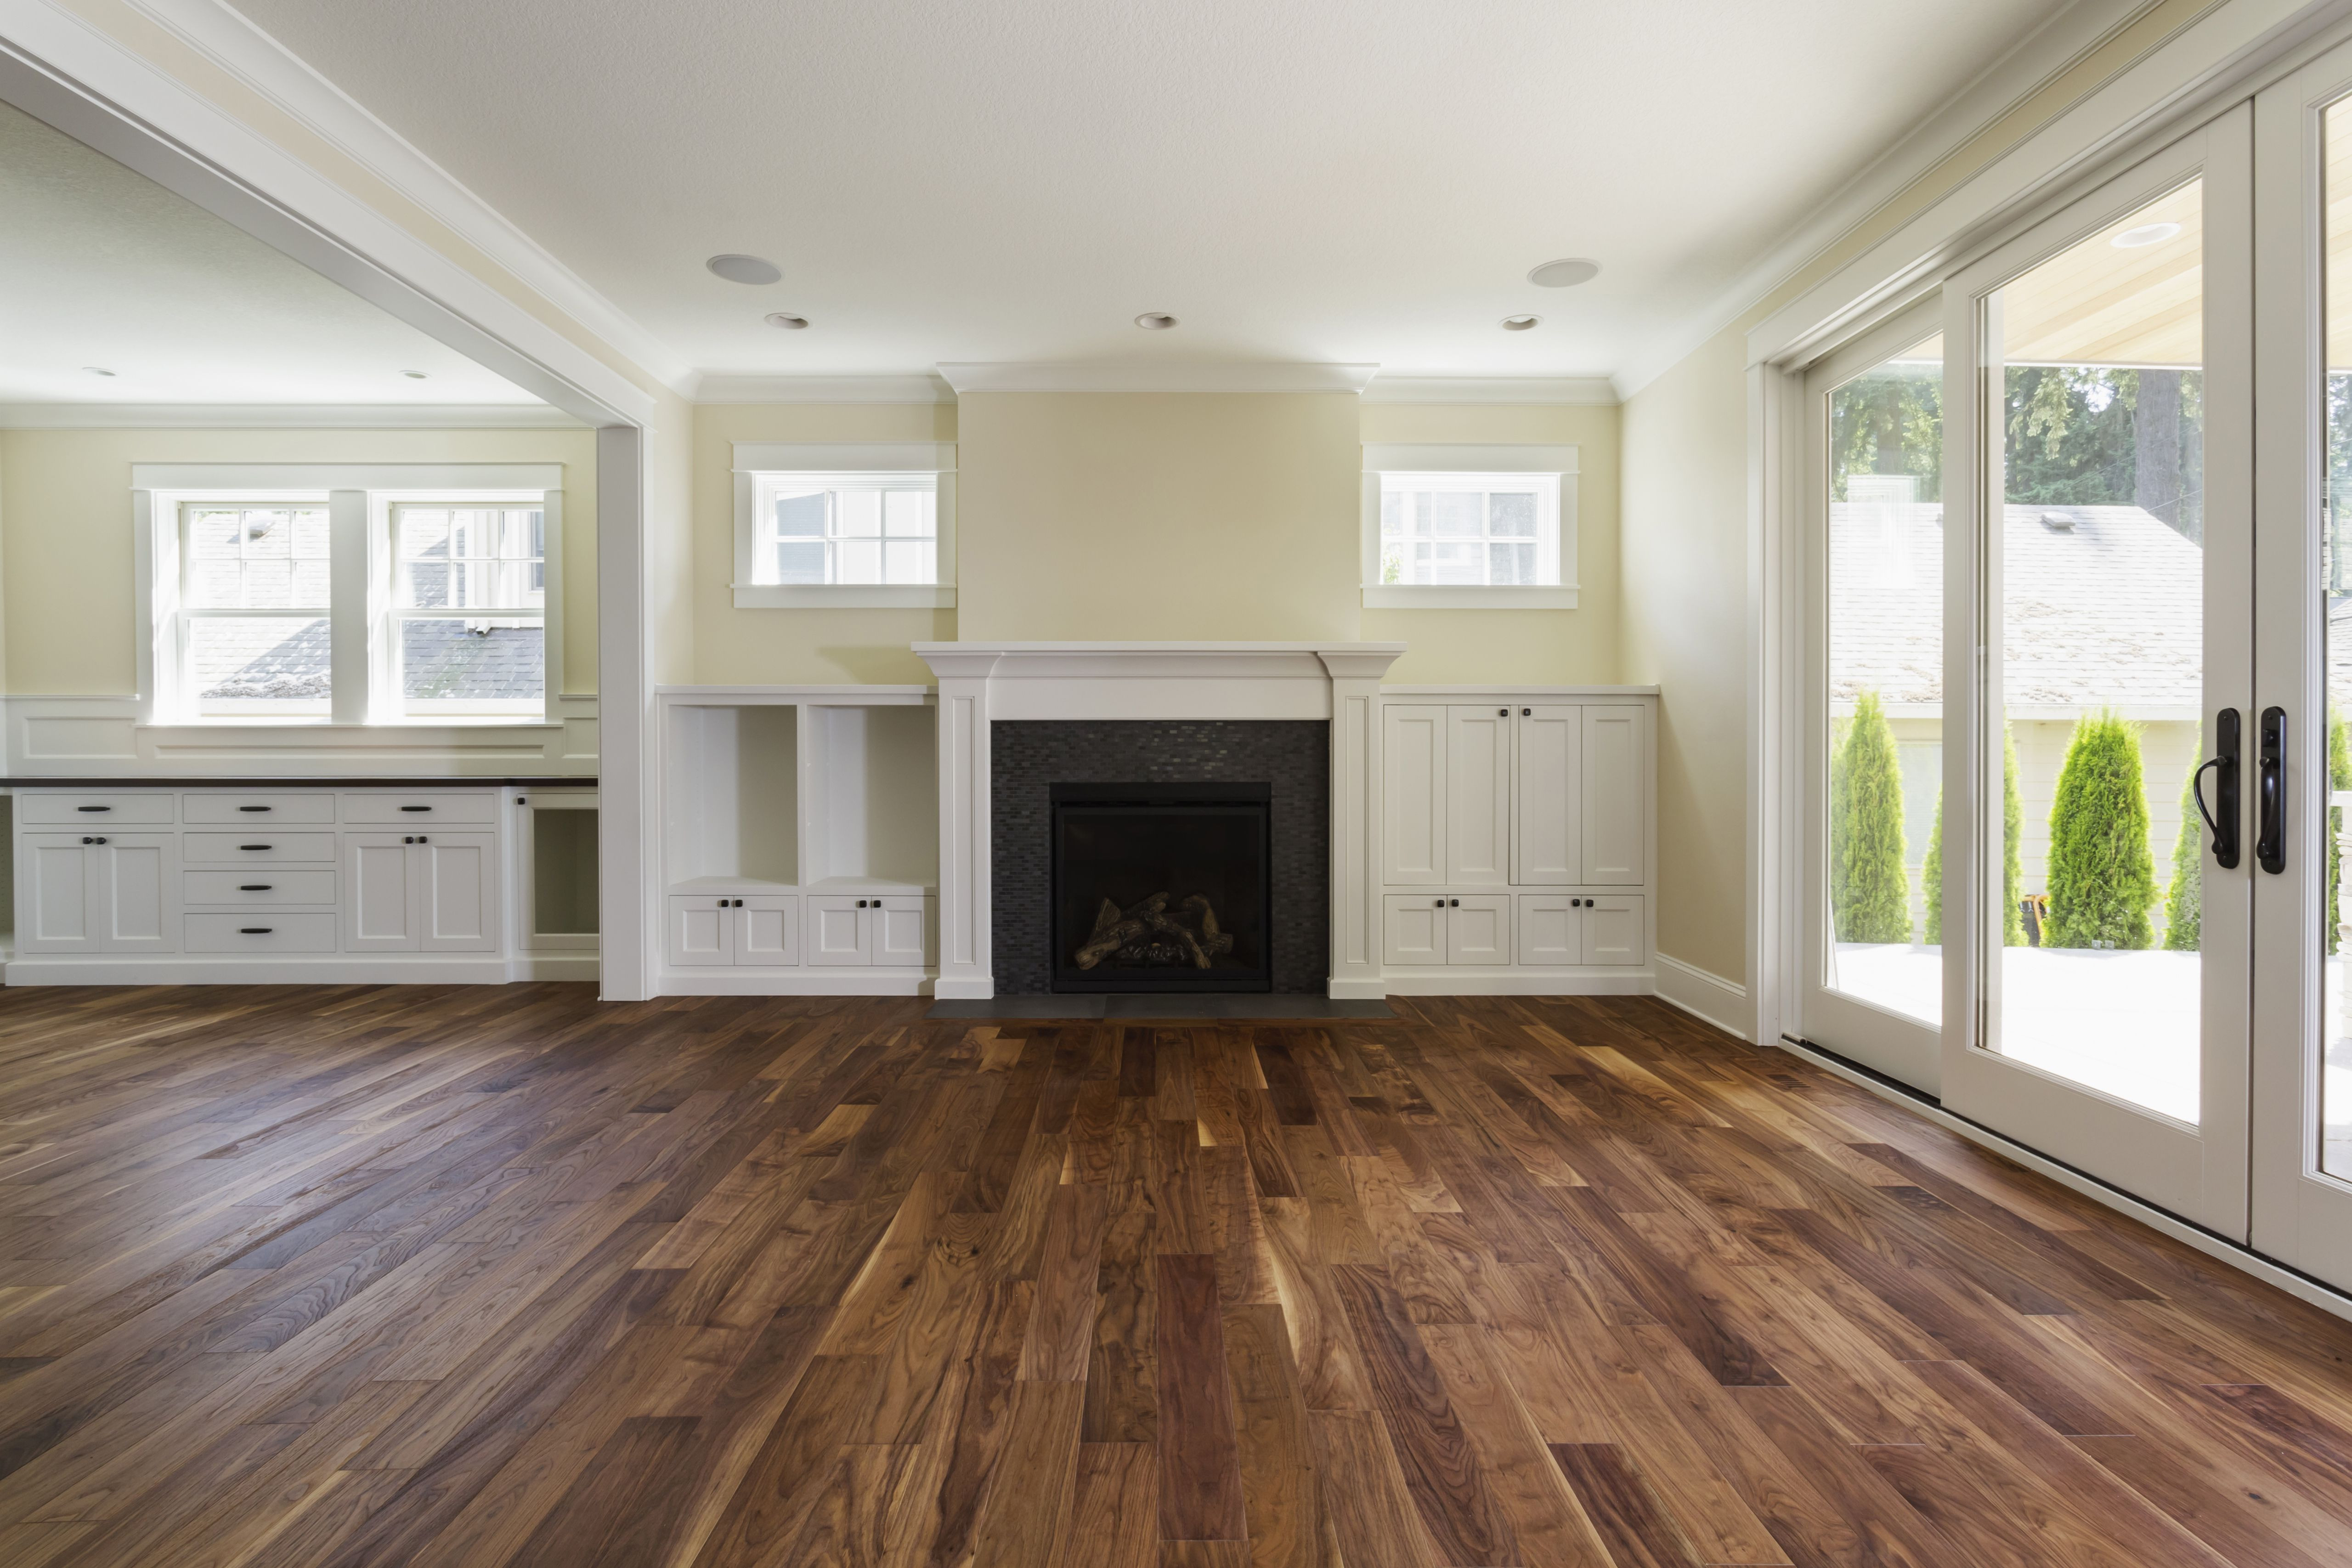 13 Lovely Hardwood Floor Steam Cleaner Reviews 2024 free download hardwood floor steam cleaner reviews of the pros and cons of prefinished hardwood flooring intended for fireplace and built in shelves in living room 482143011 57bef8e33df78cc16e035397